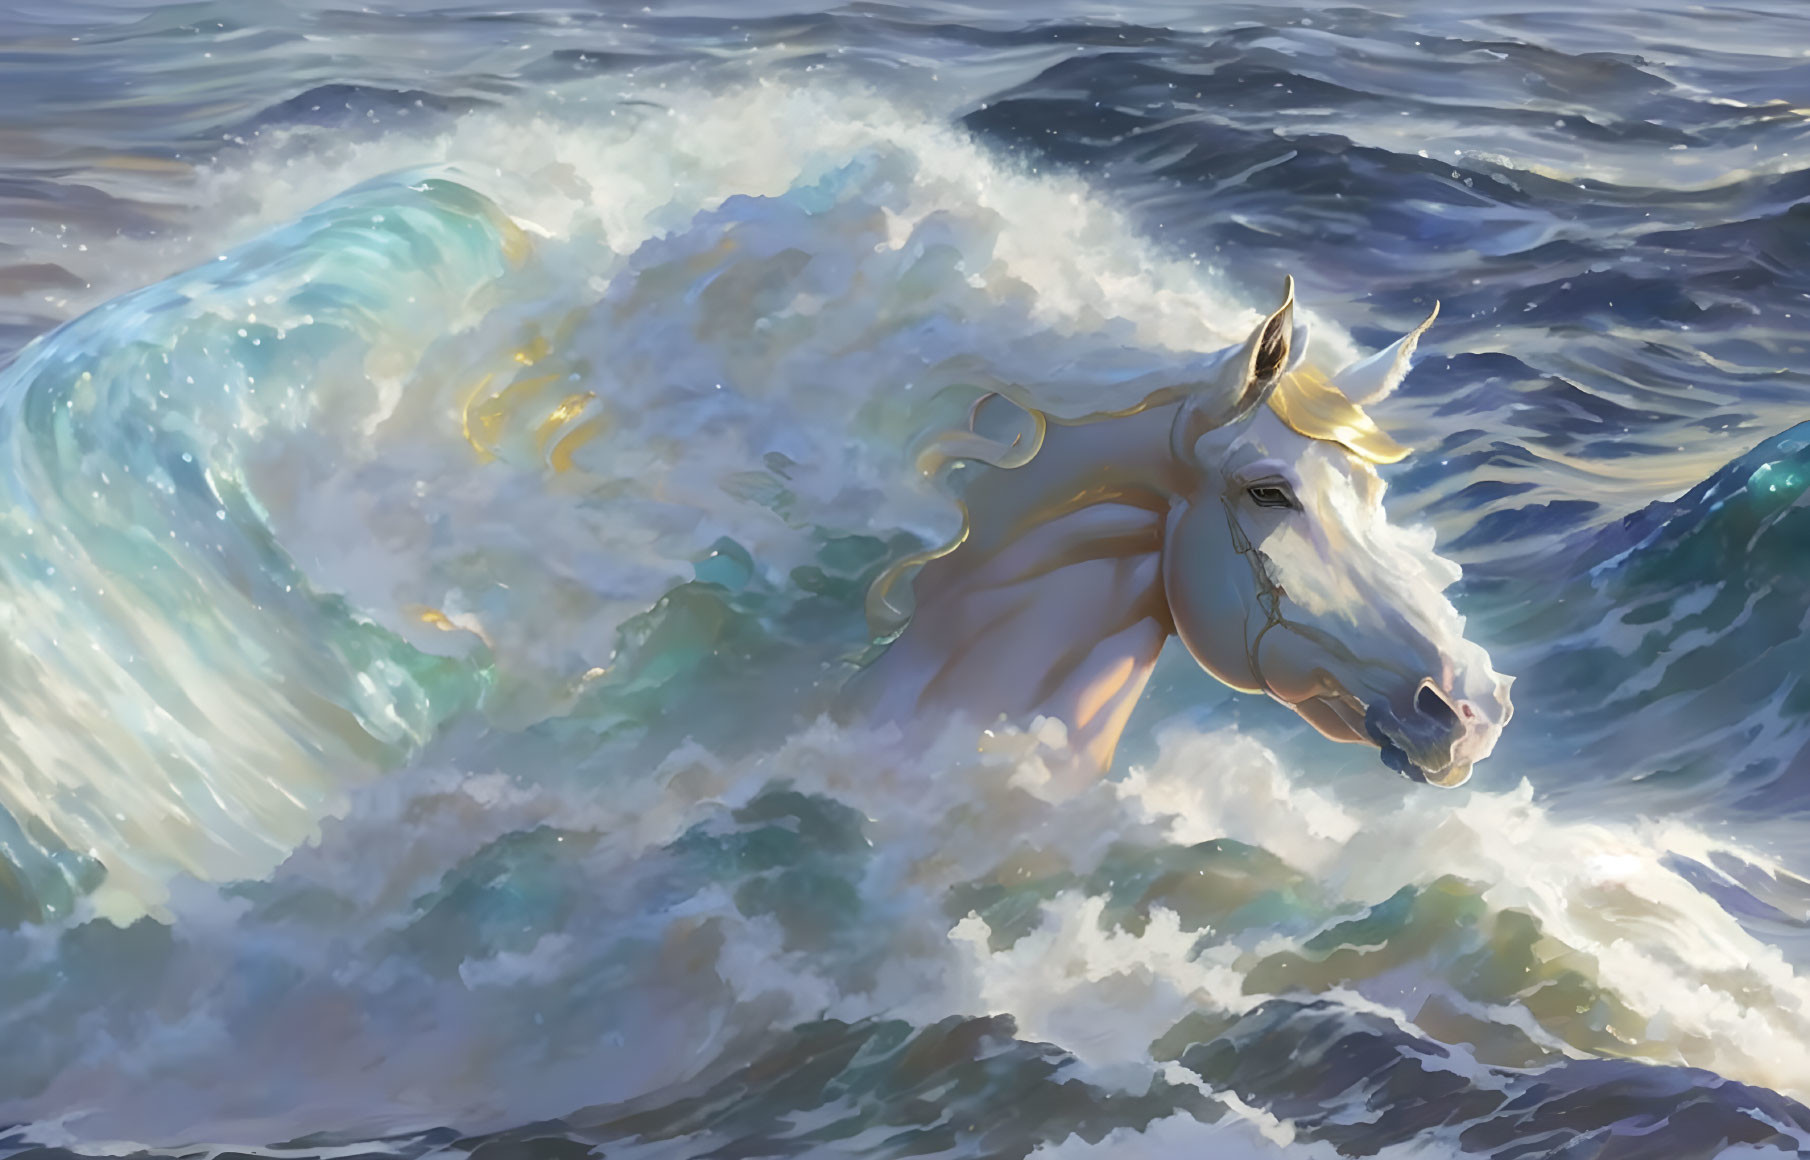 White Unicorn with Golden Mane Emerging from Ocean Waves